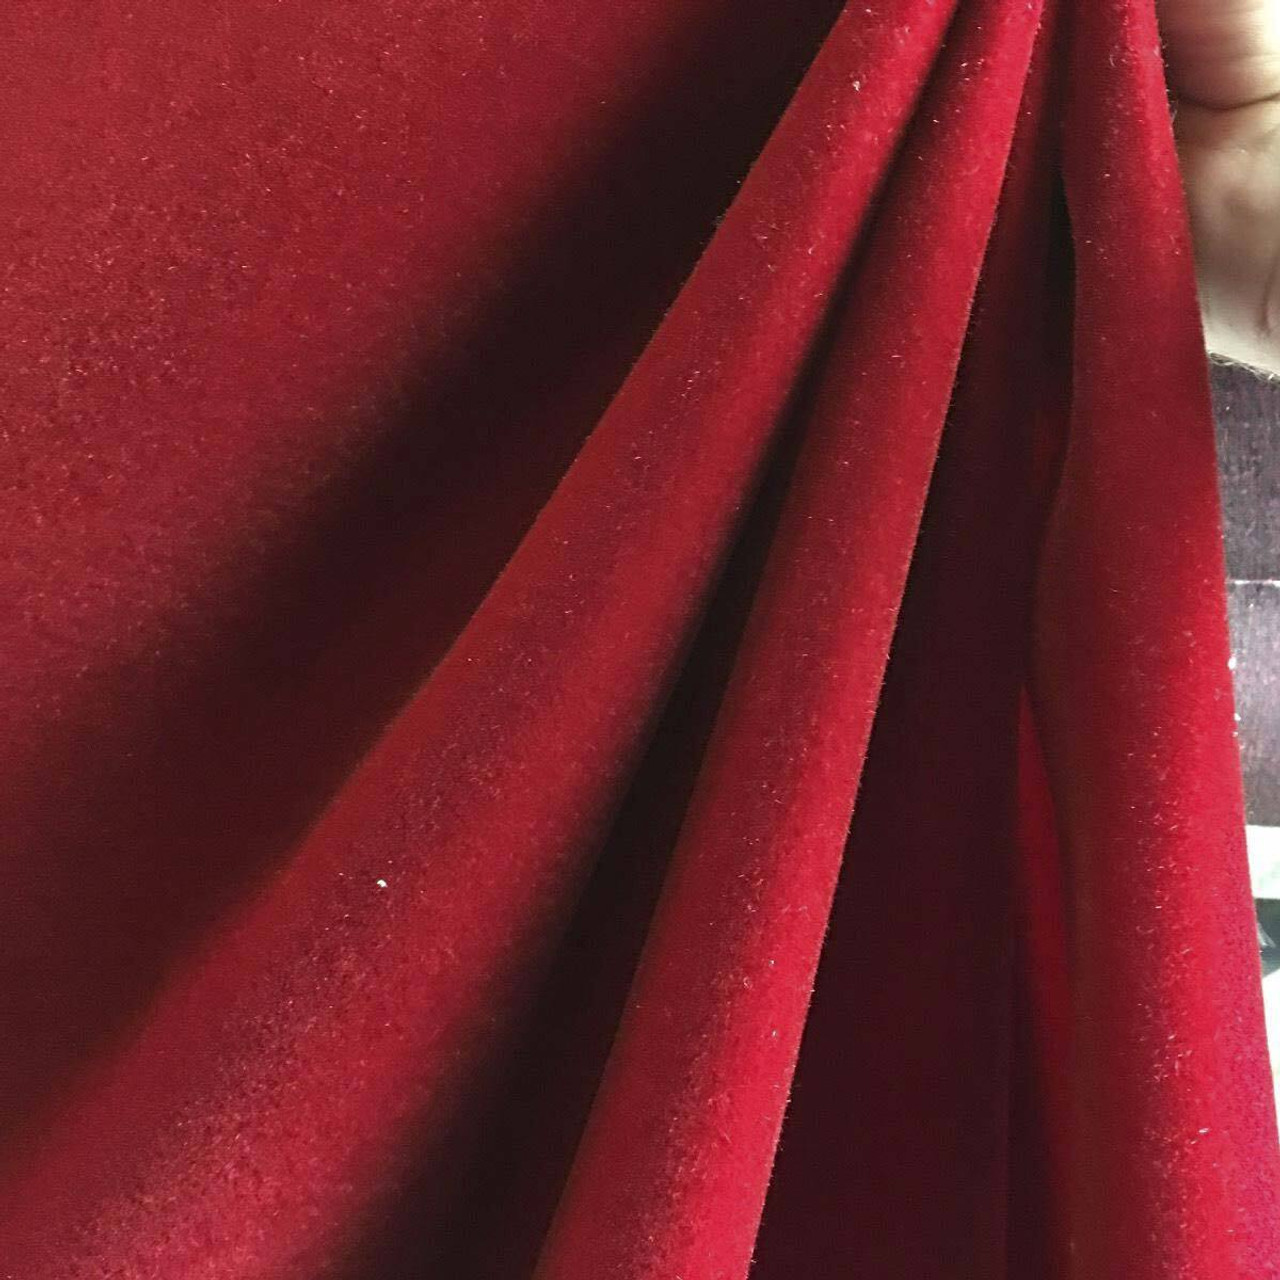 Solid Color Cherry Red Flocking Velvet Fabric Sold by the Yard for  Upholstery Crafts Curtain Drapery Material Sold per Yard 54 Inch Wide -   Canada